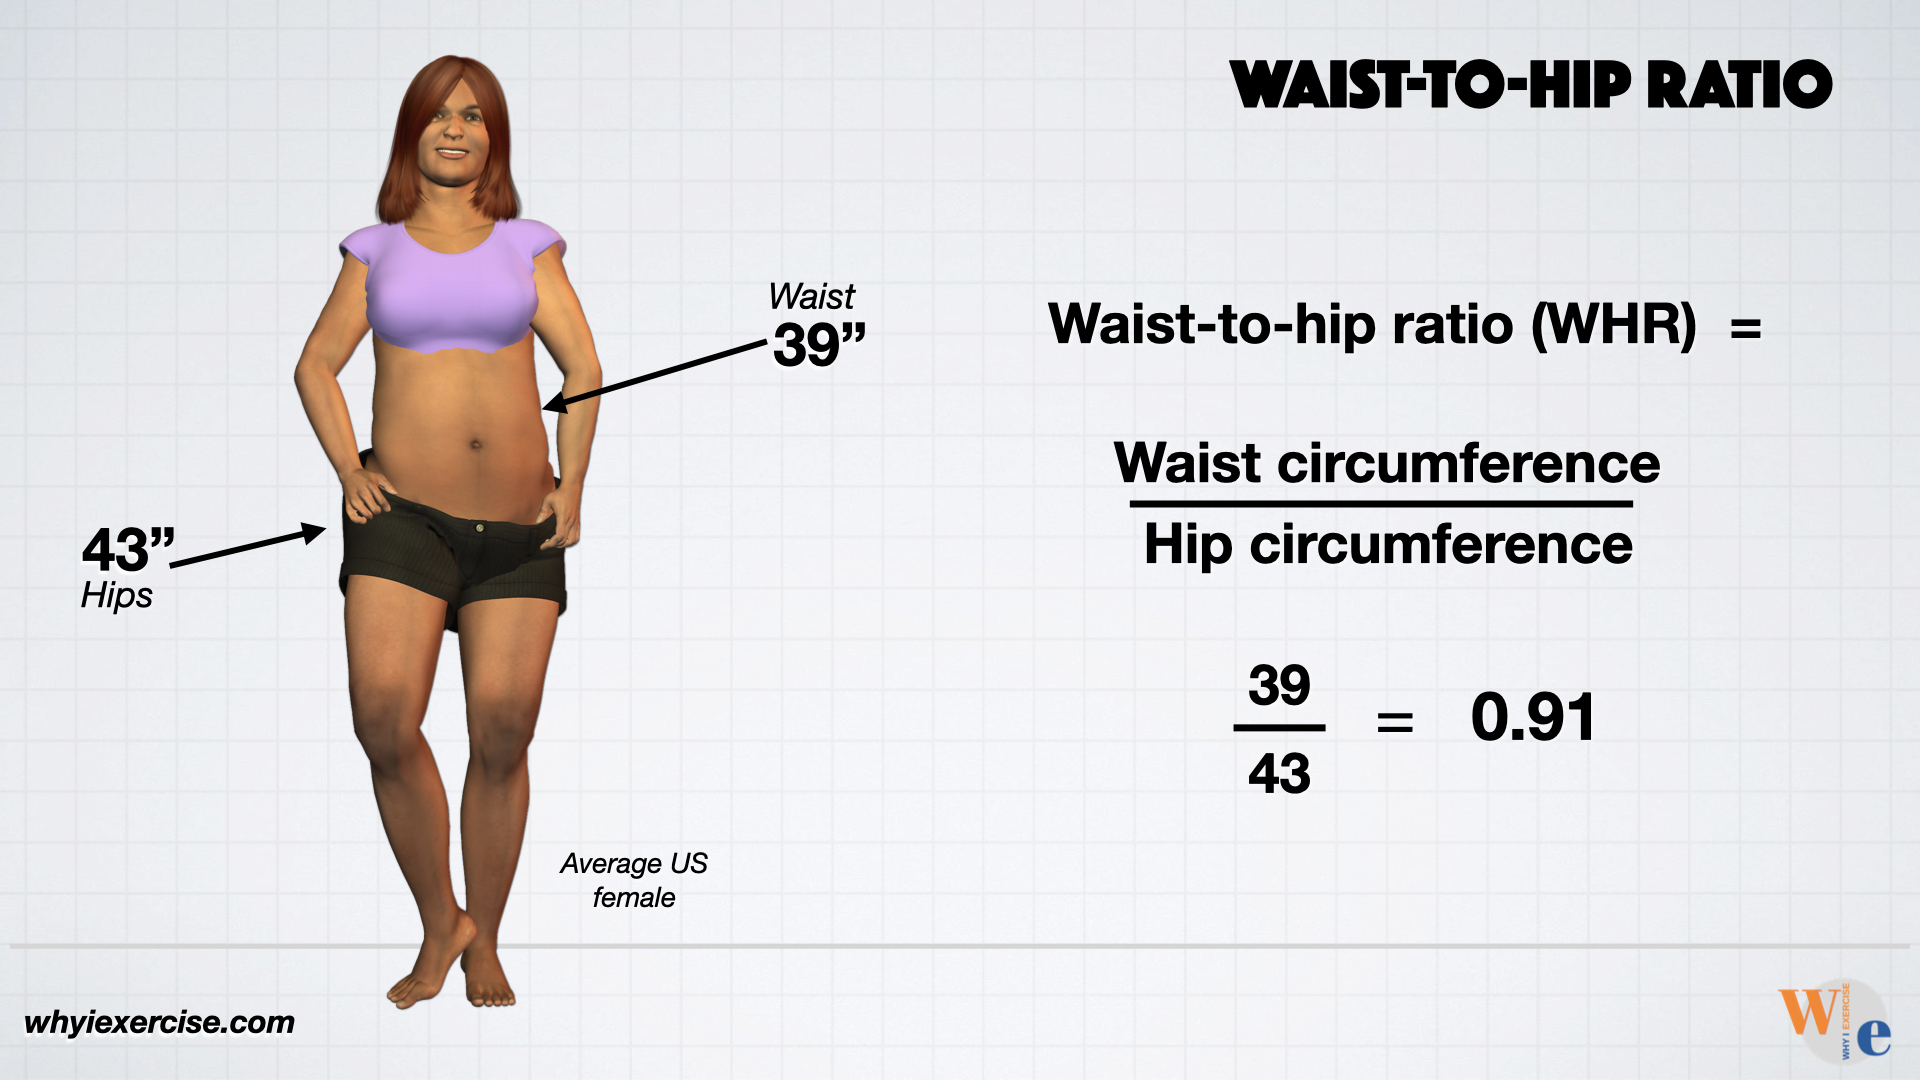 Promoting a healthy waist-to-hip ratio